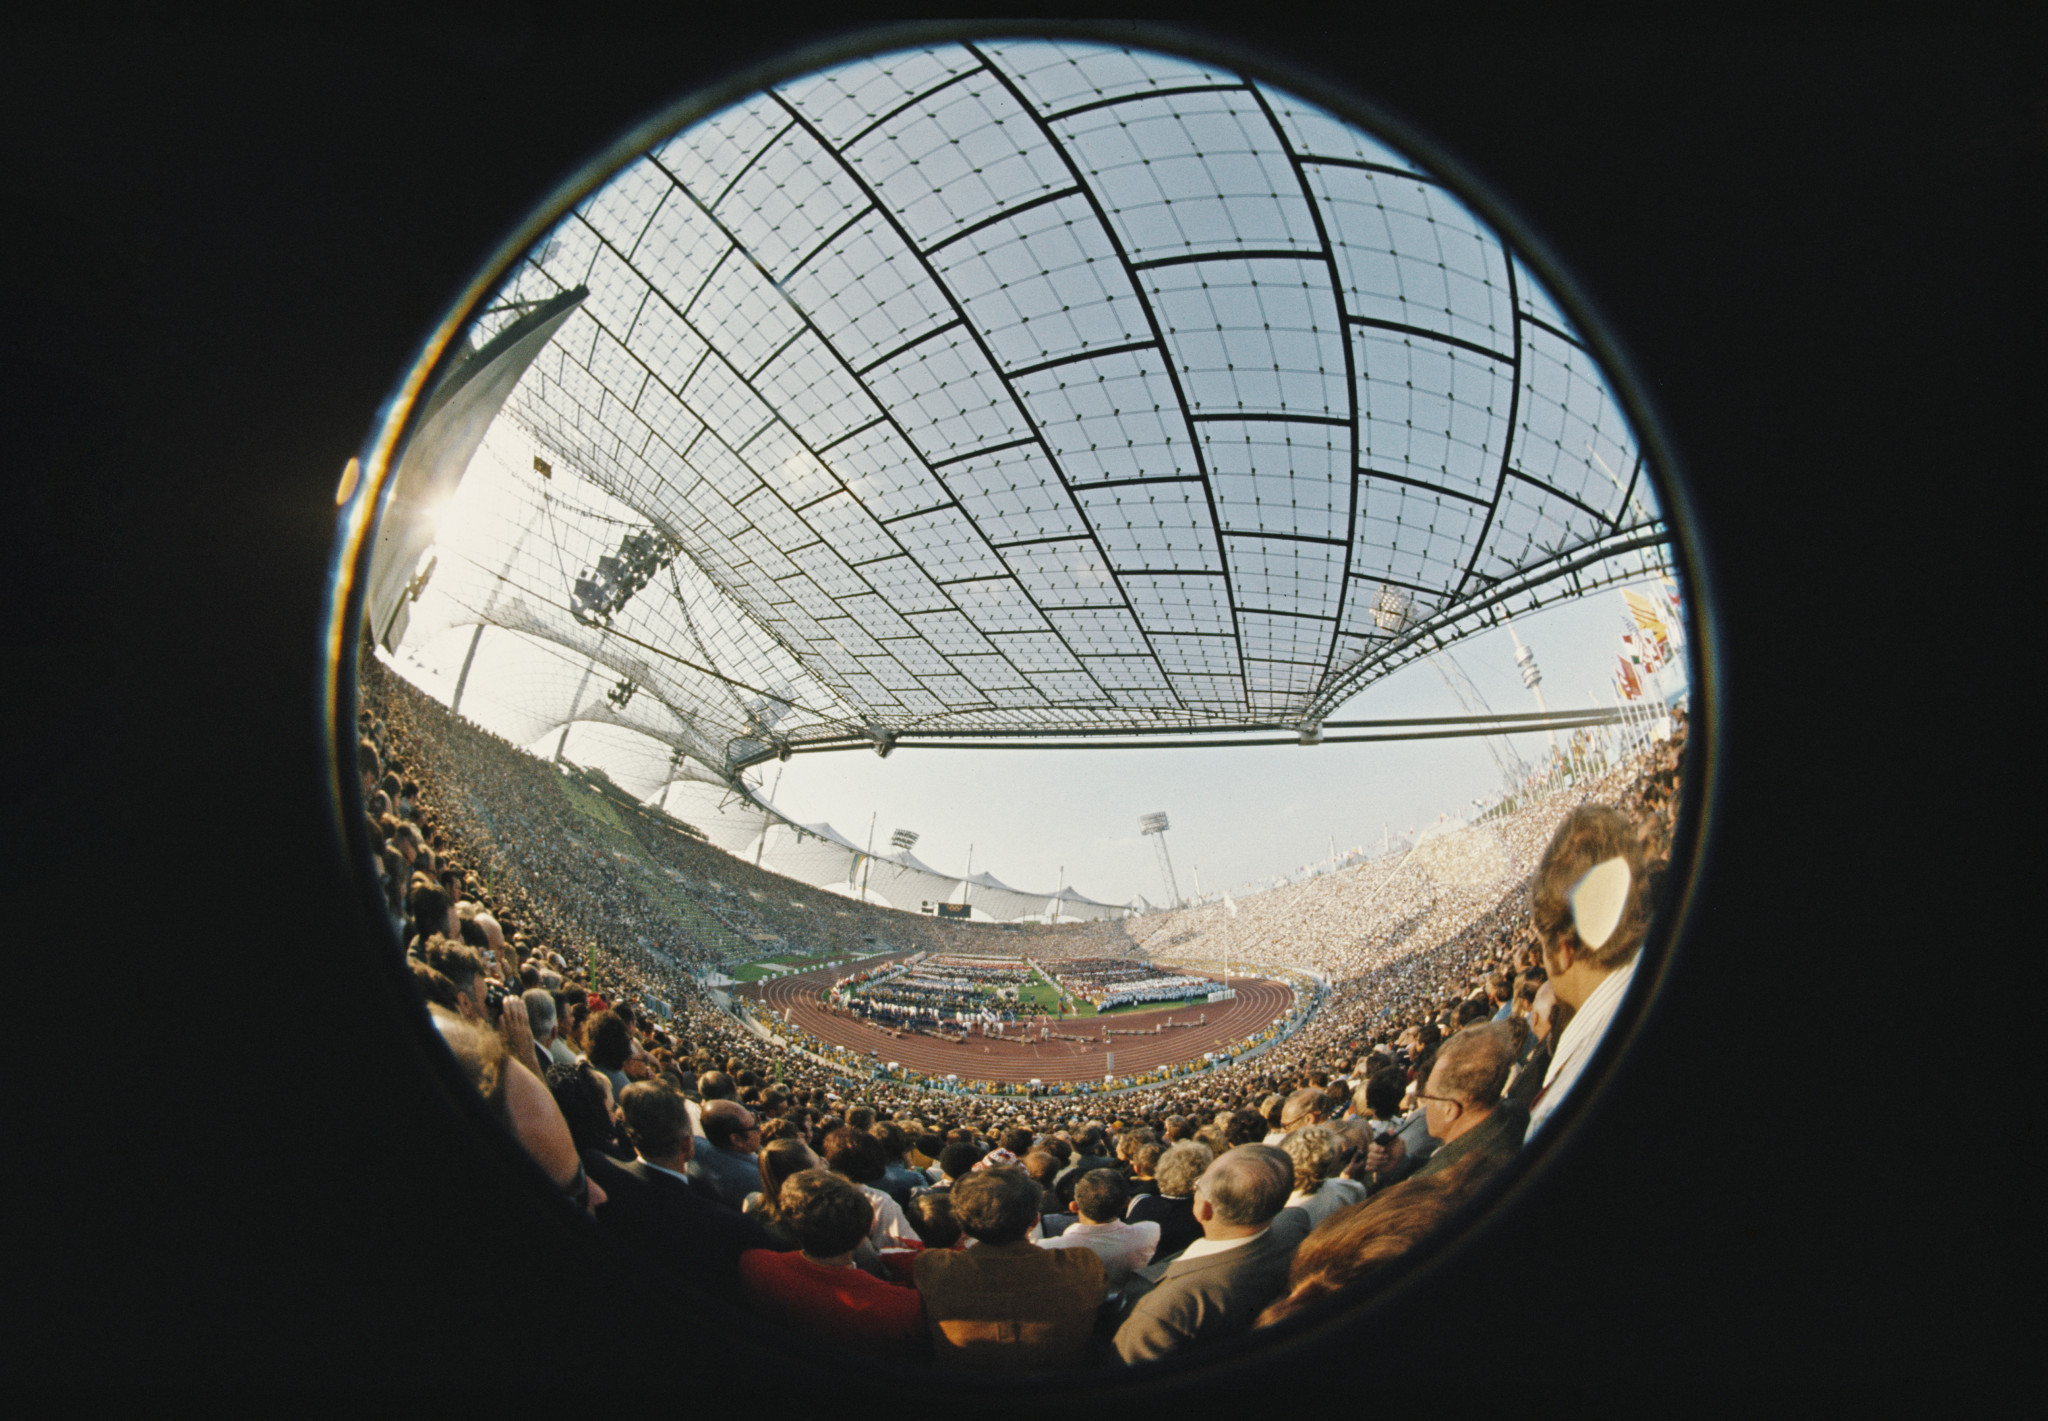 Some 7,134 competitors from 121 countries took part in the Munich 1972 Olympics ©Getty Images